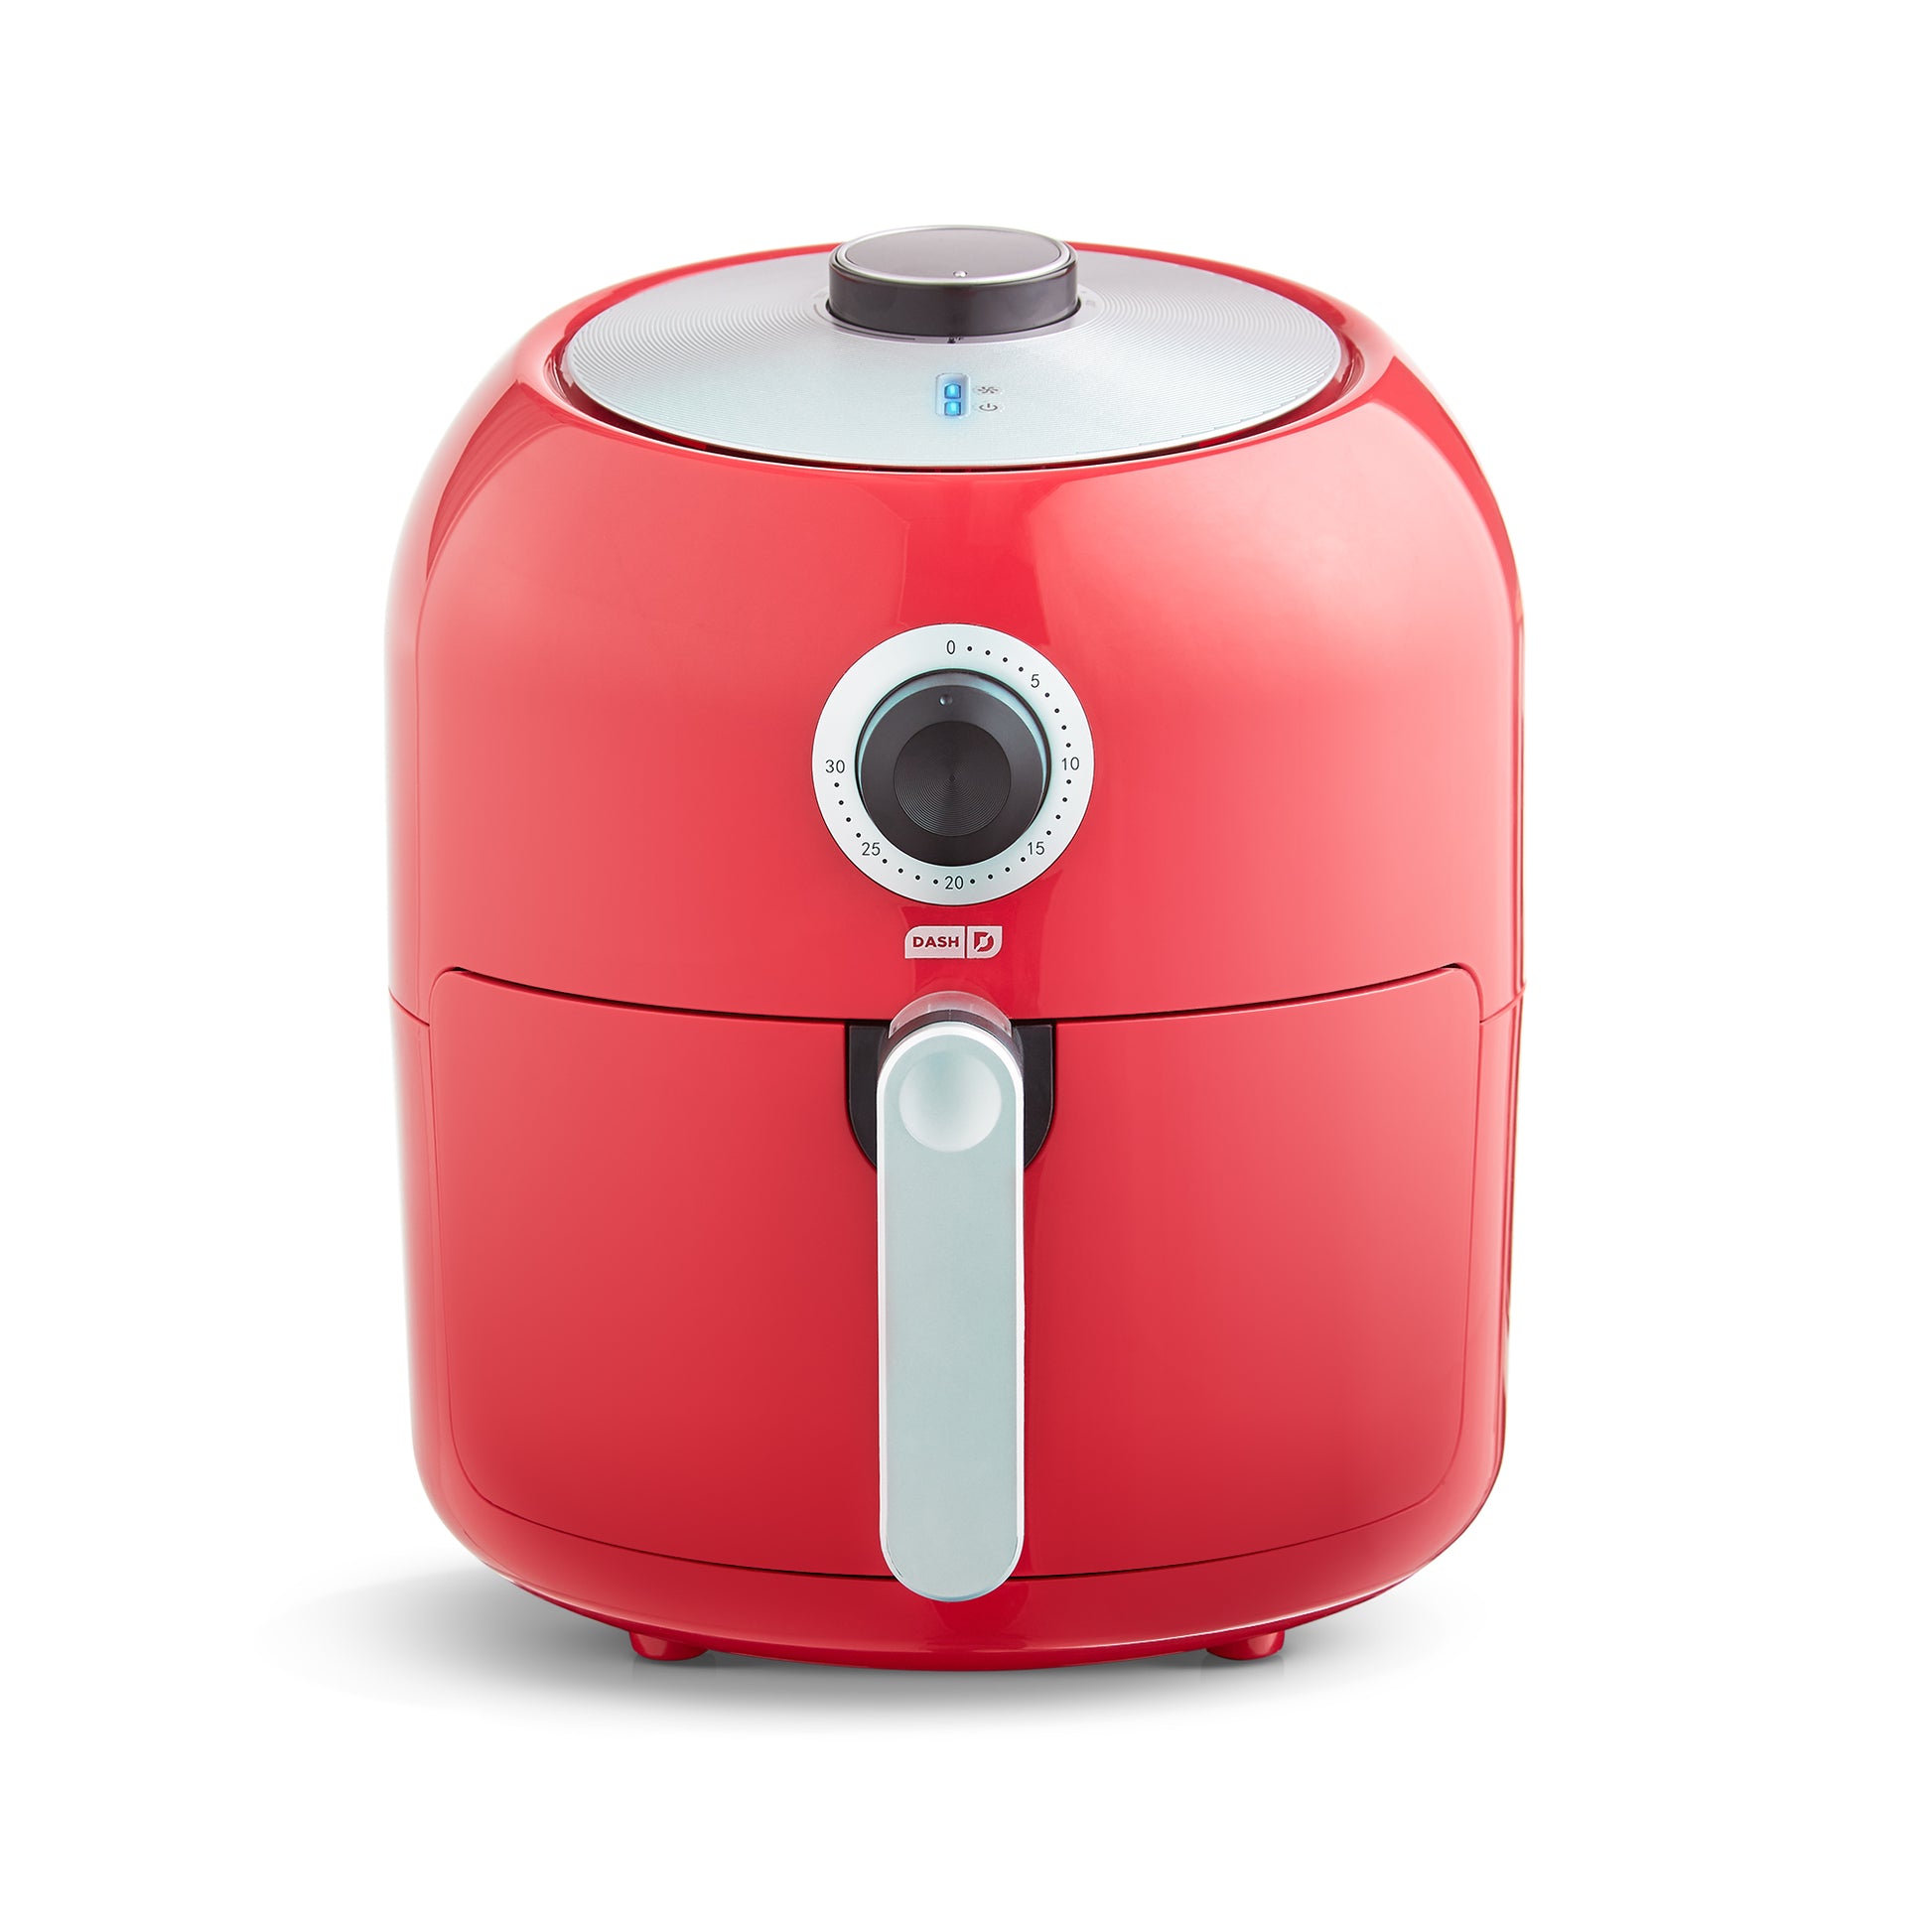 Rise by Dash Compact Air Fryer, Red